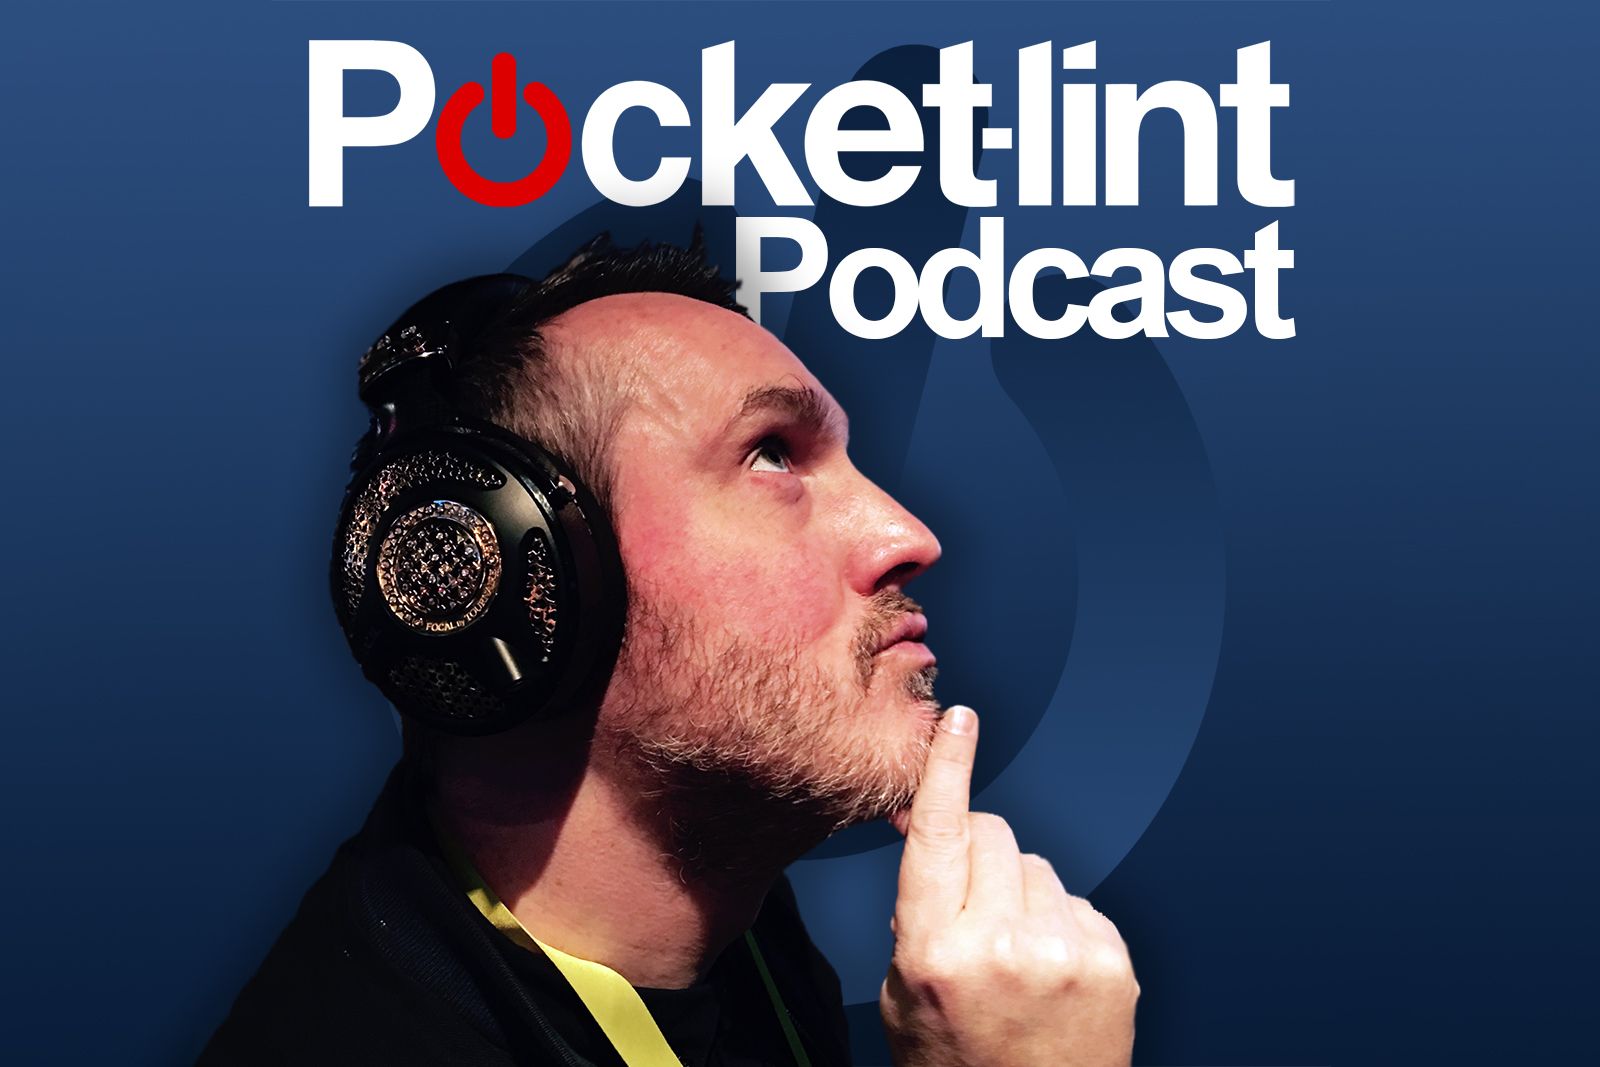 Cover art for the Pocket-lint Podcast